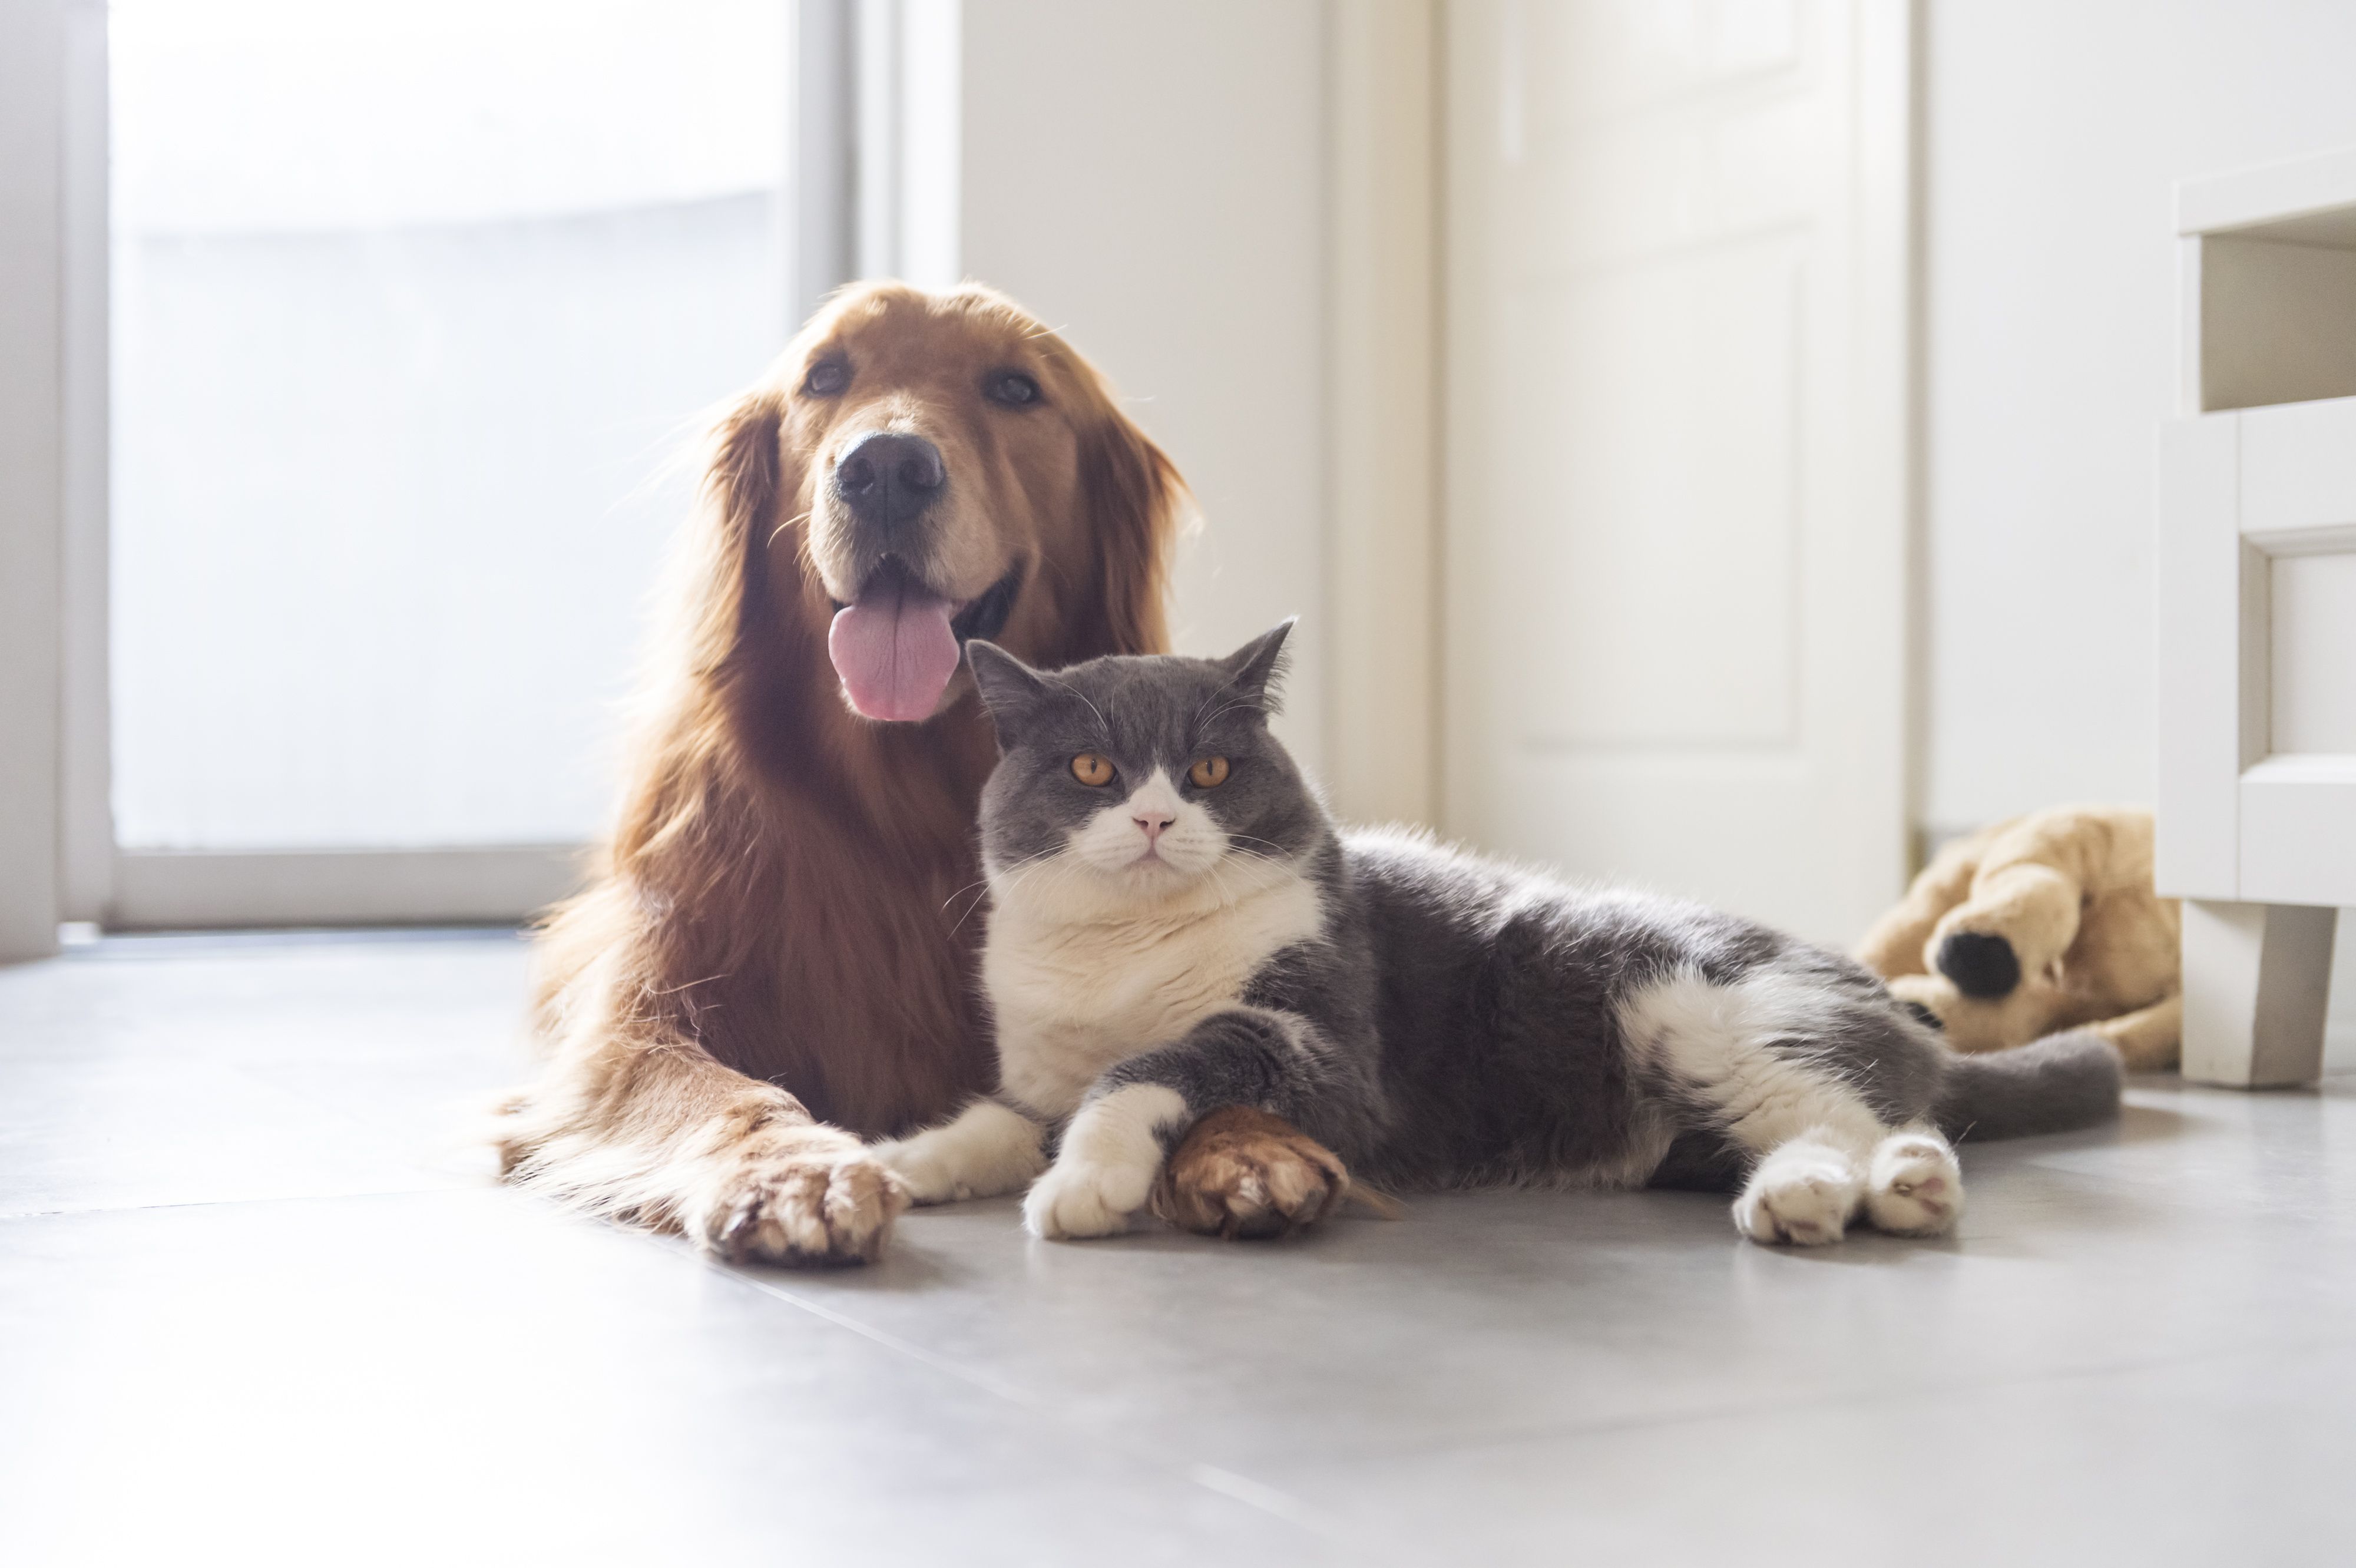 Why Dogs & Cats Are Always Enemies